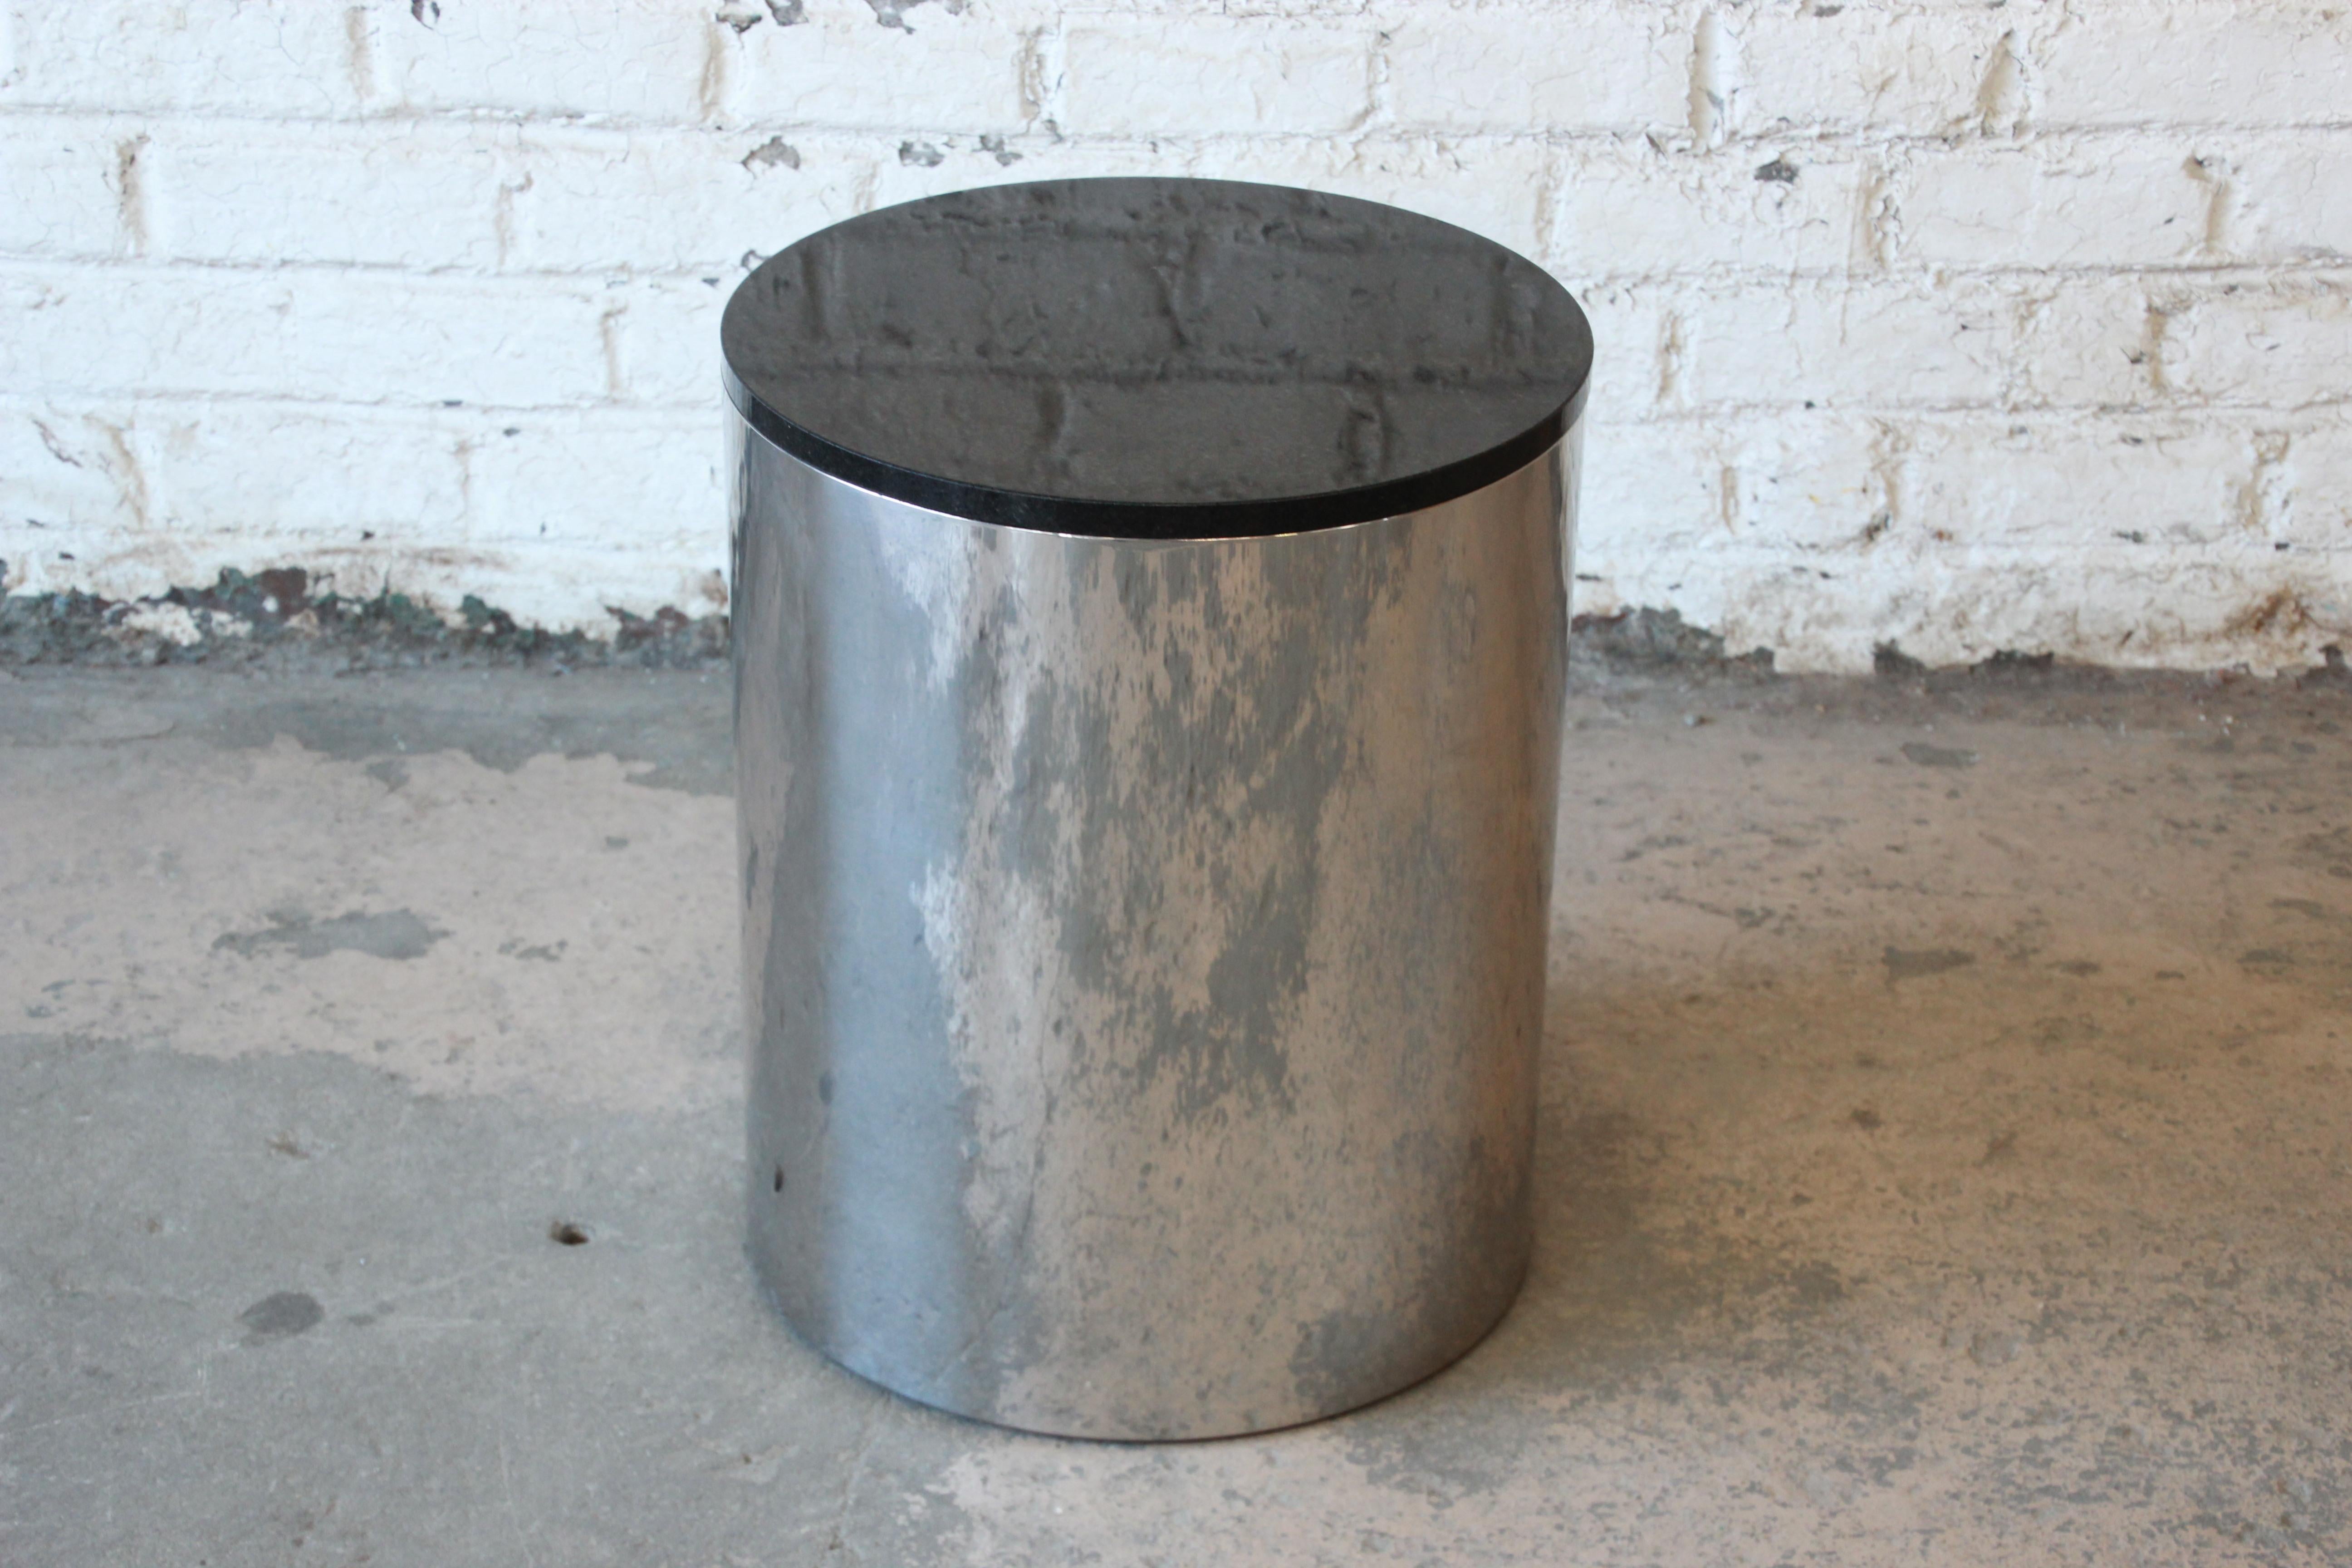 A nice Mid-Century Modern polished aluminum and black granite top drum side table or plant stand by Paul Mayen for Habitat. The table is in very good original condition, with minimal wear from age and use. A perfect addition to any modern